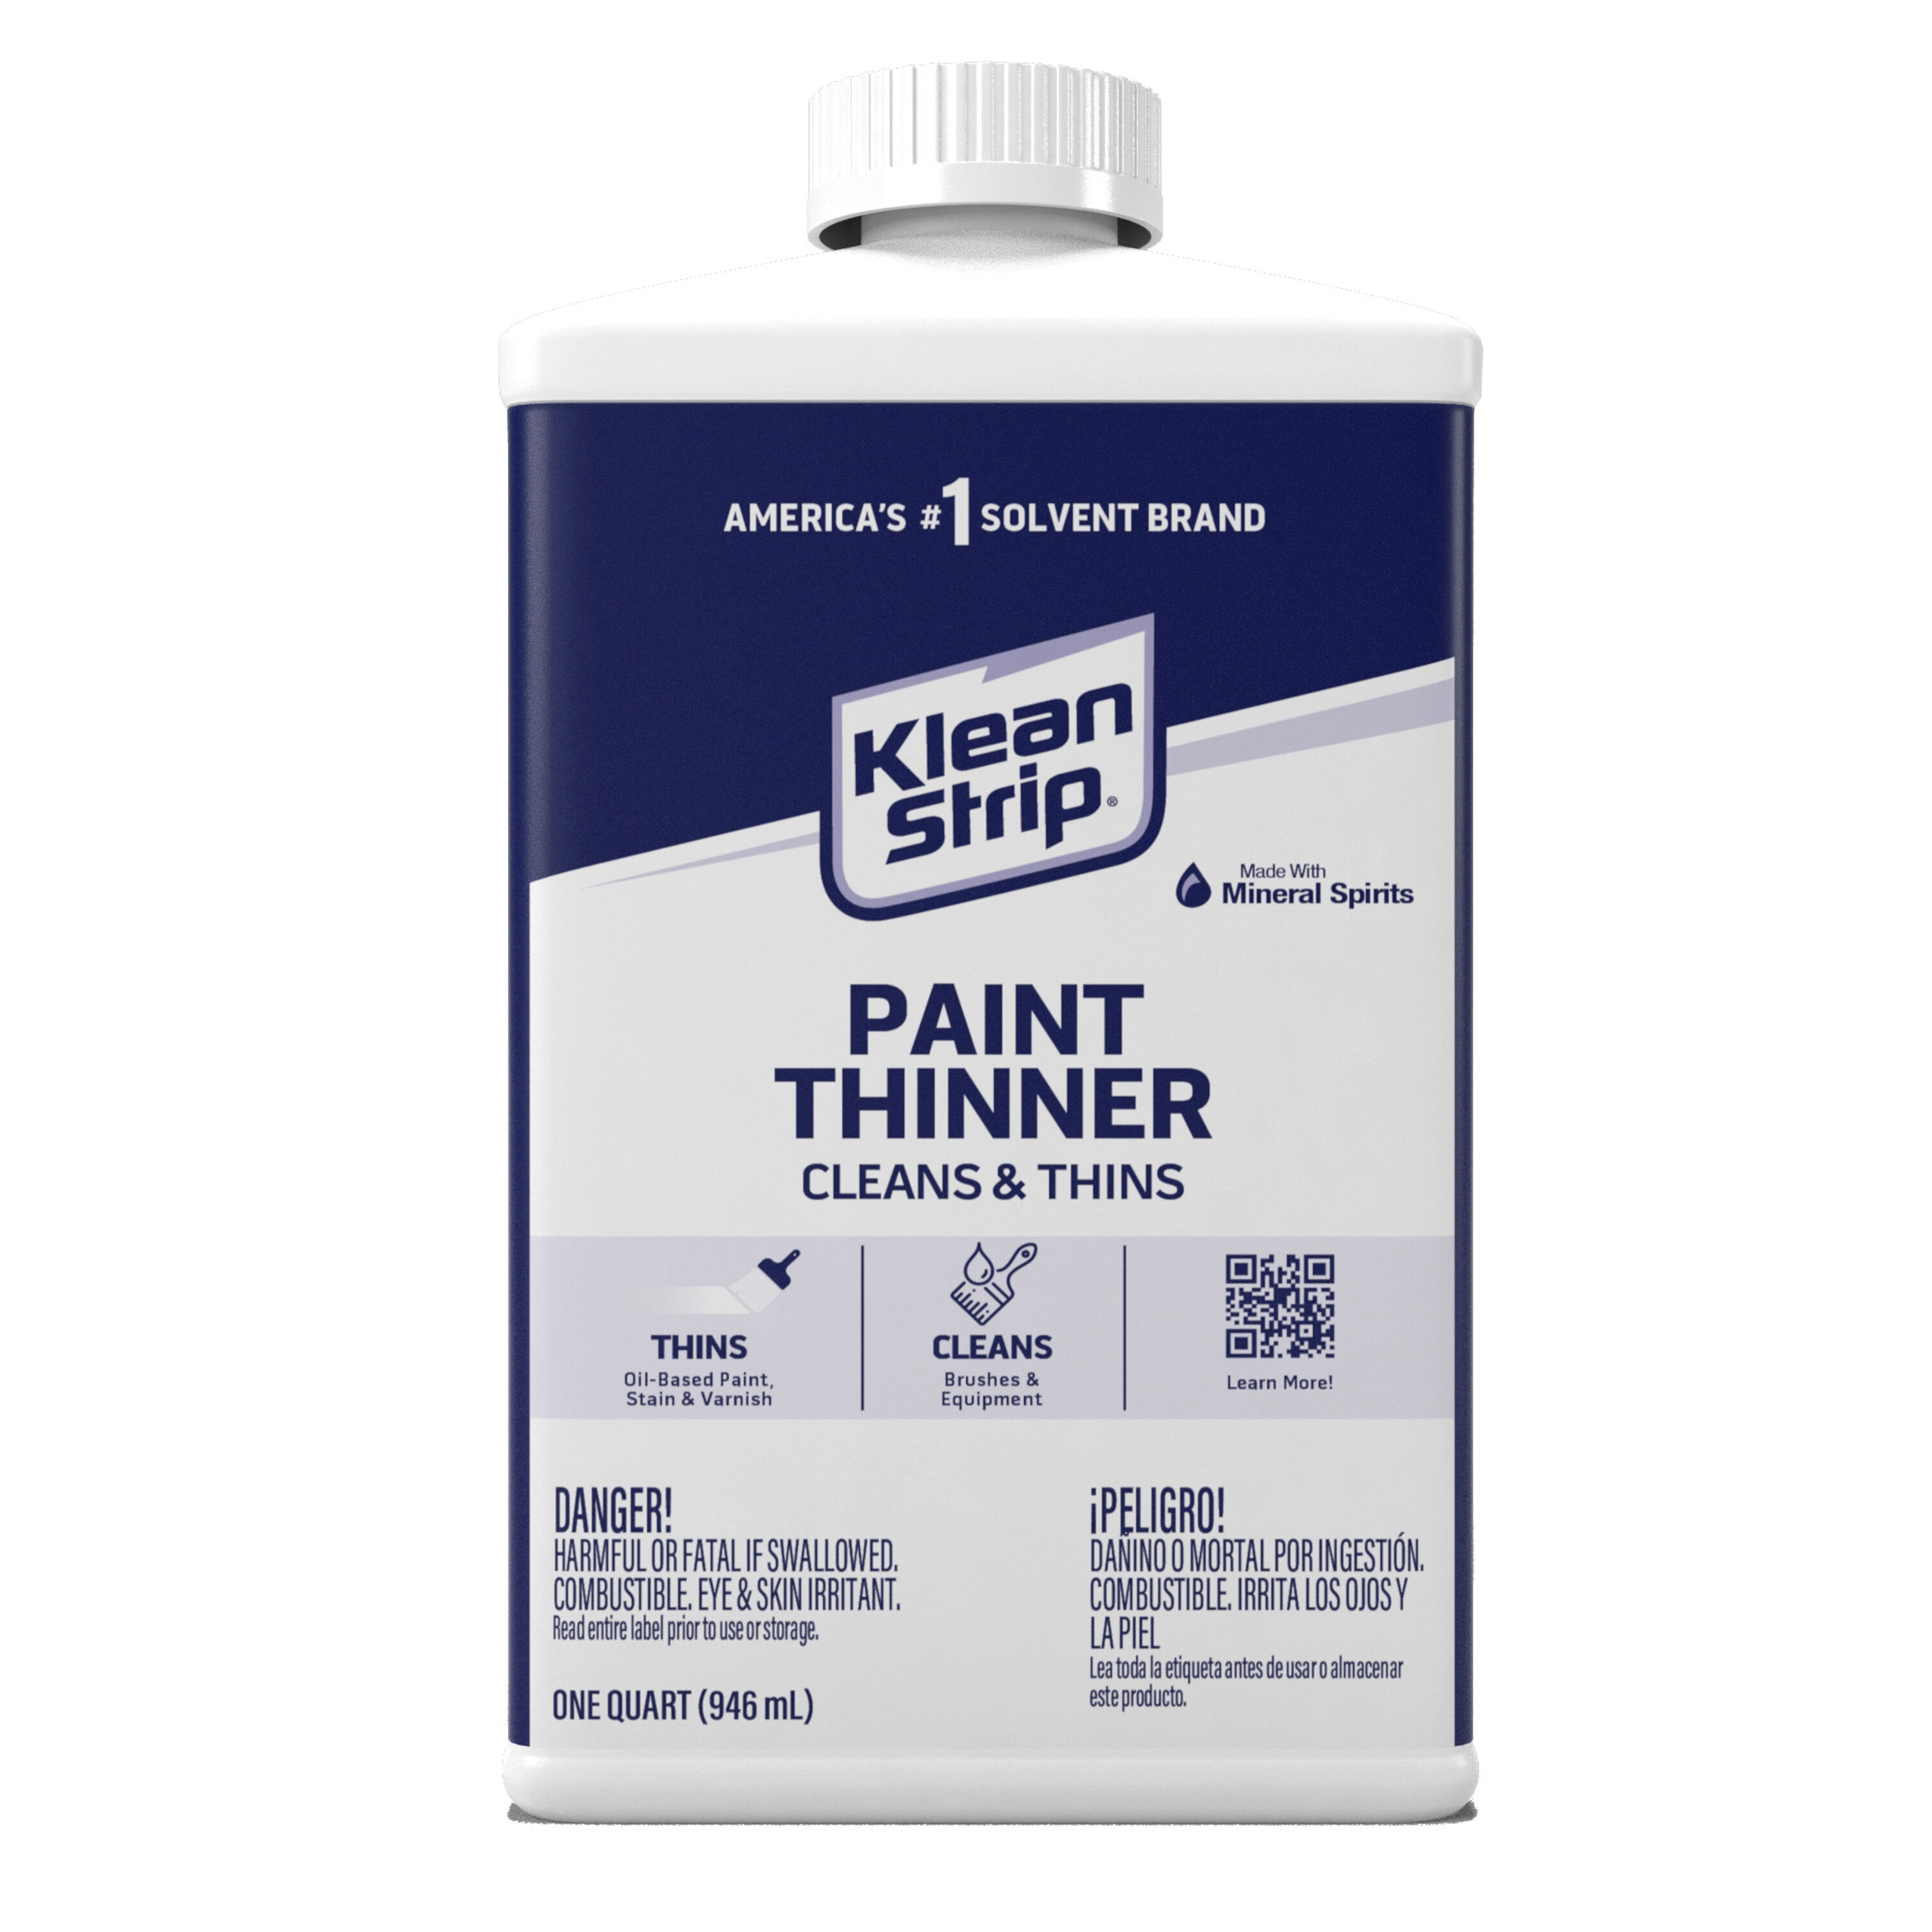 Professional Strength Remover 16 Oz. Liquid Paint Thinner Solvents